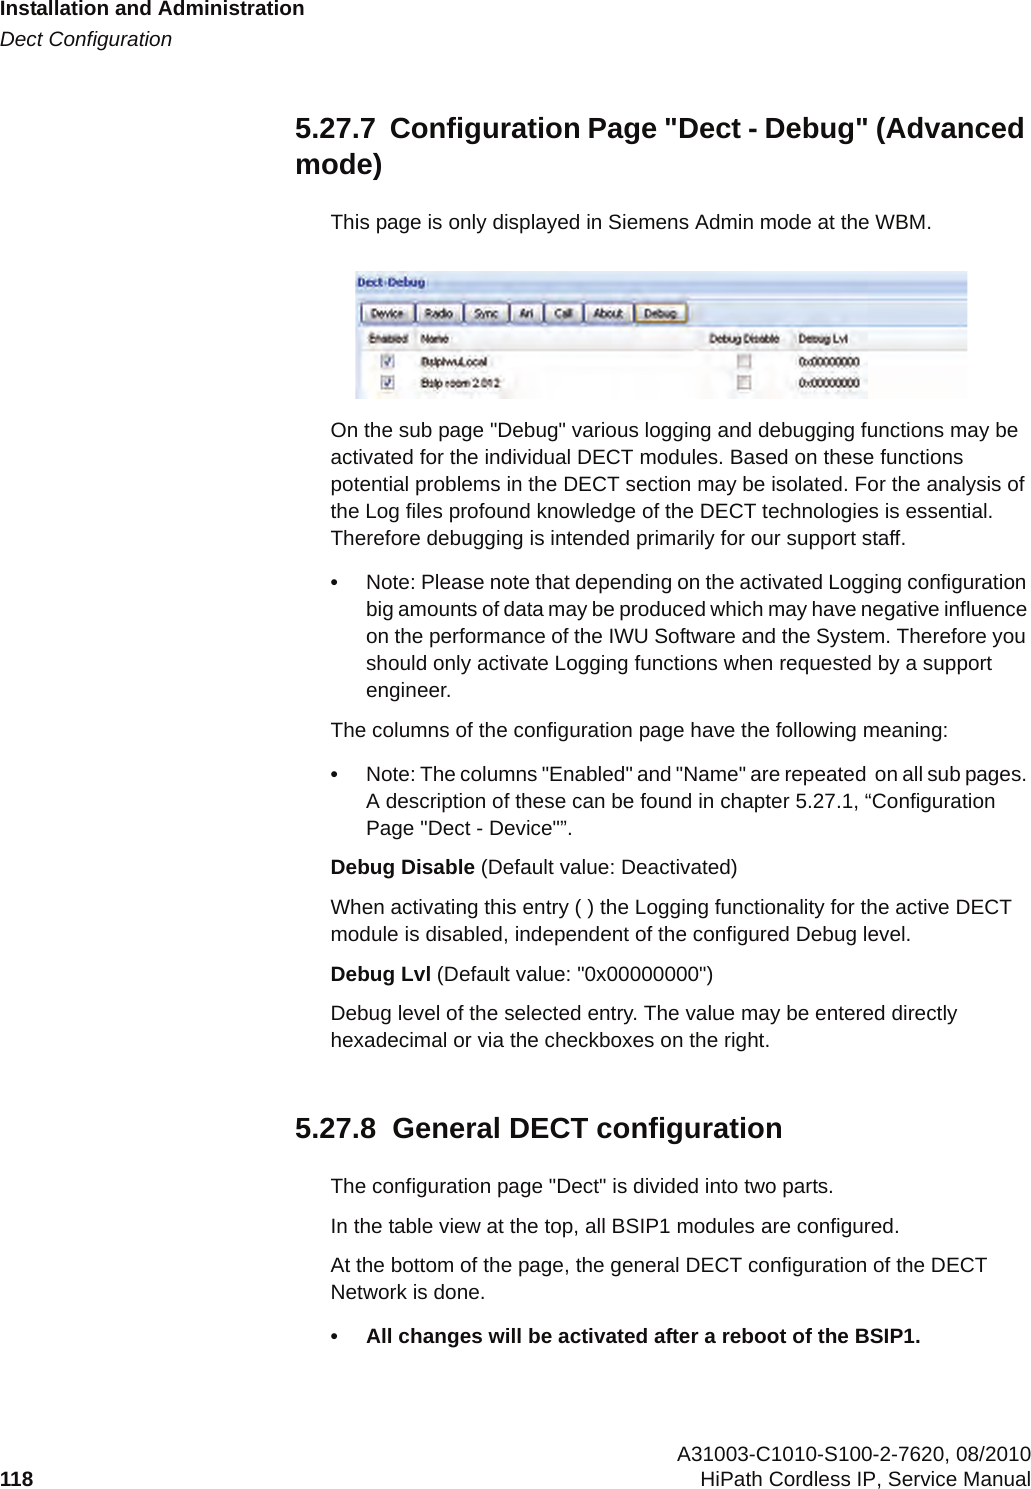 Installation and Administrationc05_ikon.fmDect Configuration A31003-C1010-S100-2-7620, 08/2010118 HiPath Cordless IP, Service Manual          5.27.7  Configuration Page &quot;Dect - Debug&quot; (Advanced mode)This page is only displayed in Siemens Admin mode at the WBM. On the sub page &quot;Debug&quot; various logging and debugging functions may be activated for the individual DECT modules. Based on these functions potential problems in the DECT section may be isolated. For the analysis of the Log files profound knowledge of the DECT technologies is essential. Therefore debugging is intended primarily for our support staff.•Note: Please note that depending on the activated Logging configuration big amounts of data may be produced which may have negative influence on the performance of the IWU Software and the System. Therefore you should only activate Logging functions when requested by a support engineer.The columns of the configuration page have the following meaning:•Note: The columns &quot;Enabled&quot; and &quot;Name&quot; are repeated  on all sub pages. A description of these can be found in chapter 5.27.1, “Configuration Page &quot;Dect - Device&quot;”.Debug Disable (Default value: Deactivated)When activating this entry ( ) the Logging functionality for the active DECT module is disabled, independent of the configured Debug level. Debug Lvl (Default value: &quot;0x00000000&quot;)Debug level of the selected entry. The value may be entered directly hexadecimal or via the checkboxes on the right.5.27.8  General DECT configurationThe configuration page &quot;Dect&quot; is divided into two parts.In the table view at the top, all BSIP1 modules are configured. At the bottom of the page, the general DECT configuration of the DECT Network is done.• All changes will be activated after a reboot of the BSIP1.